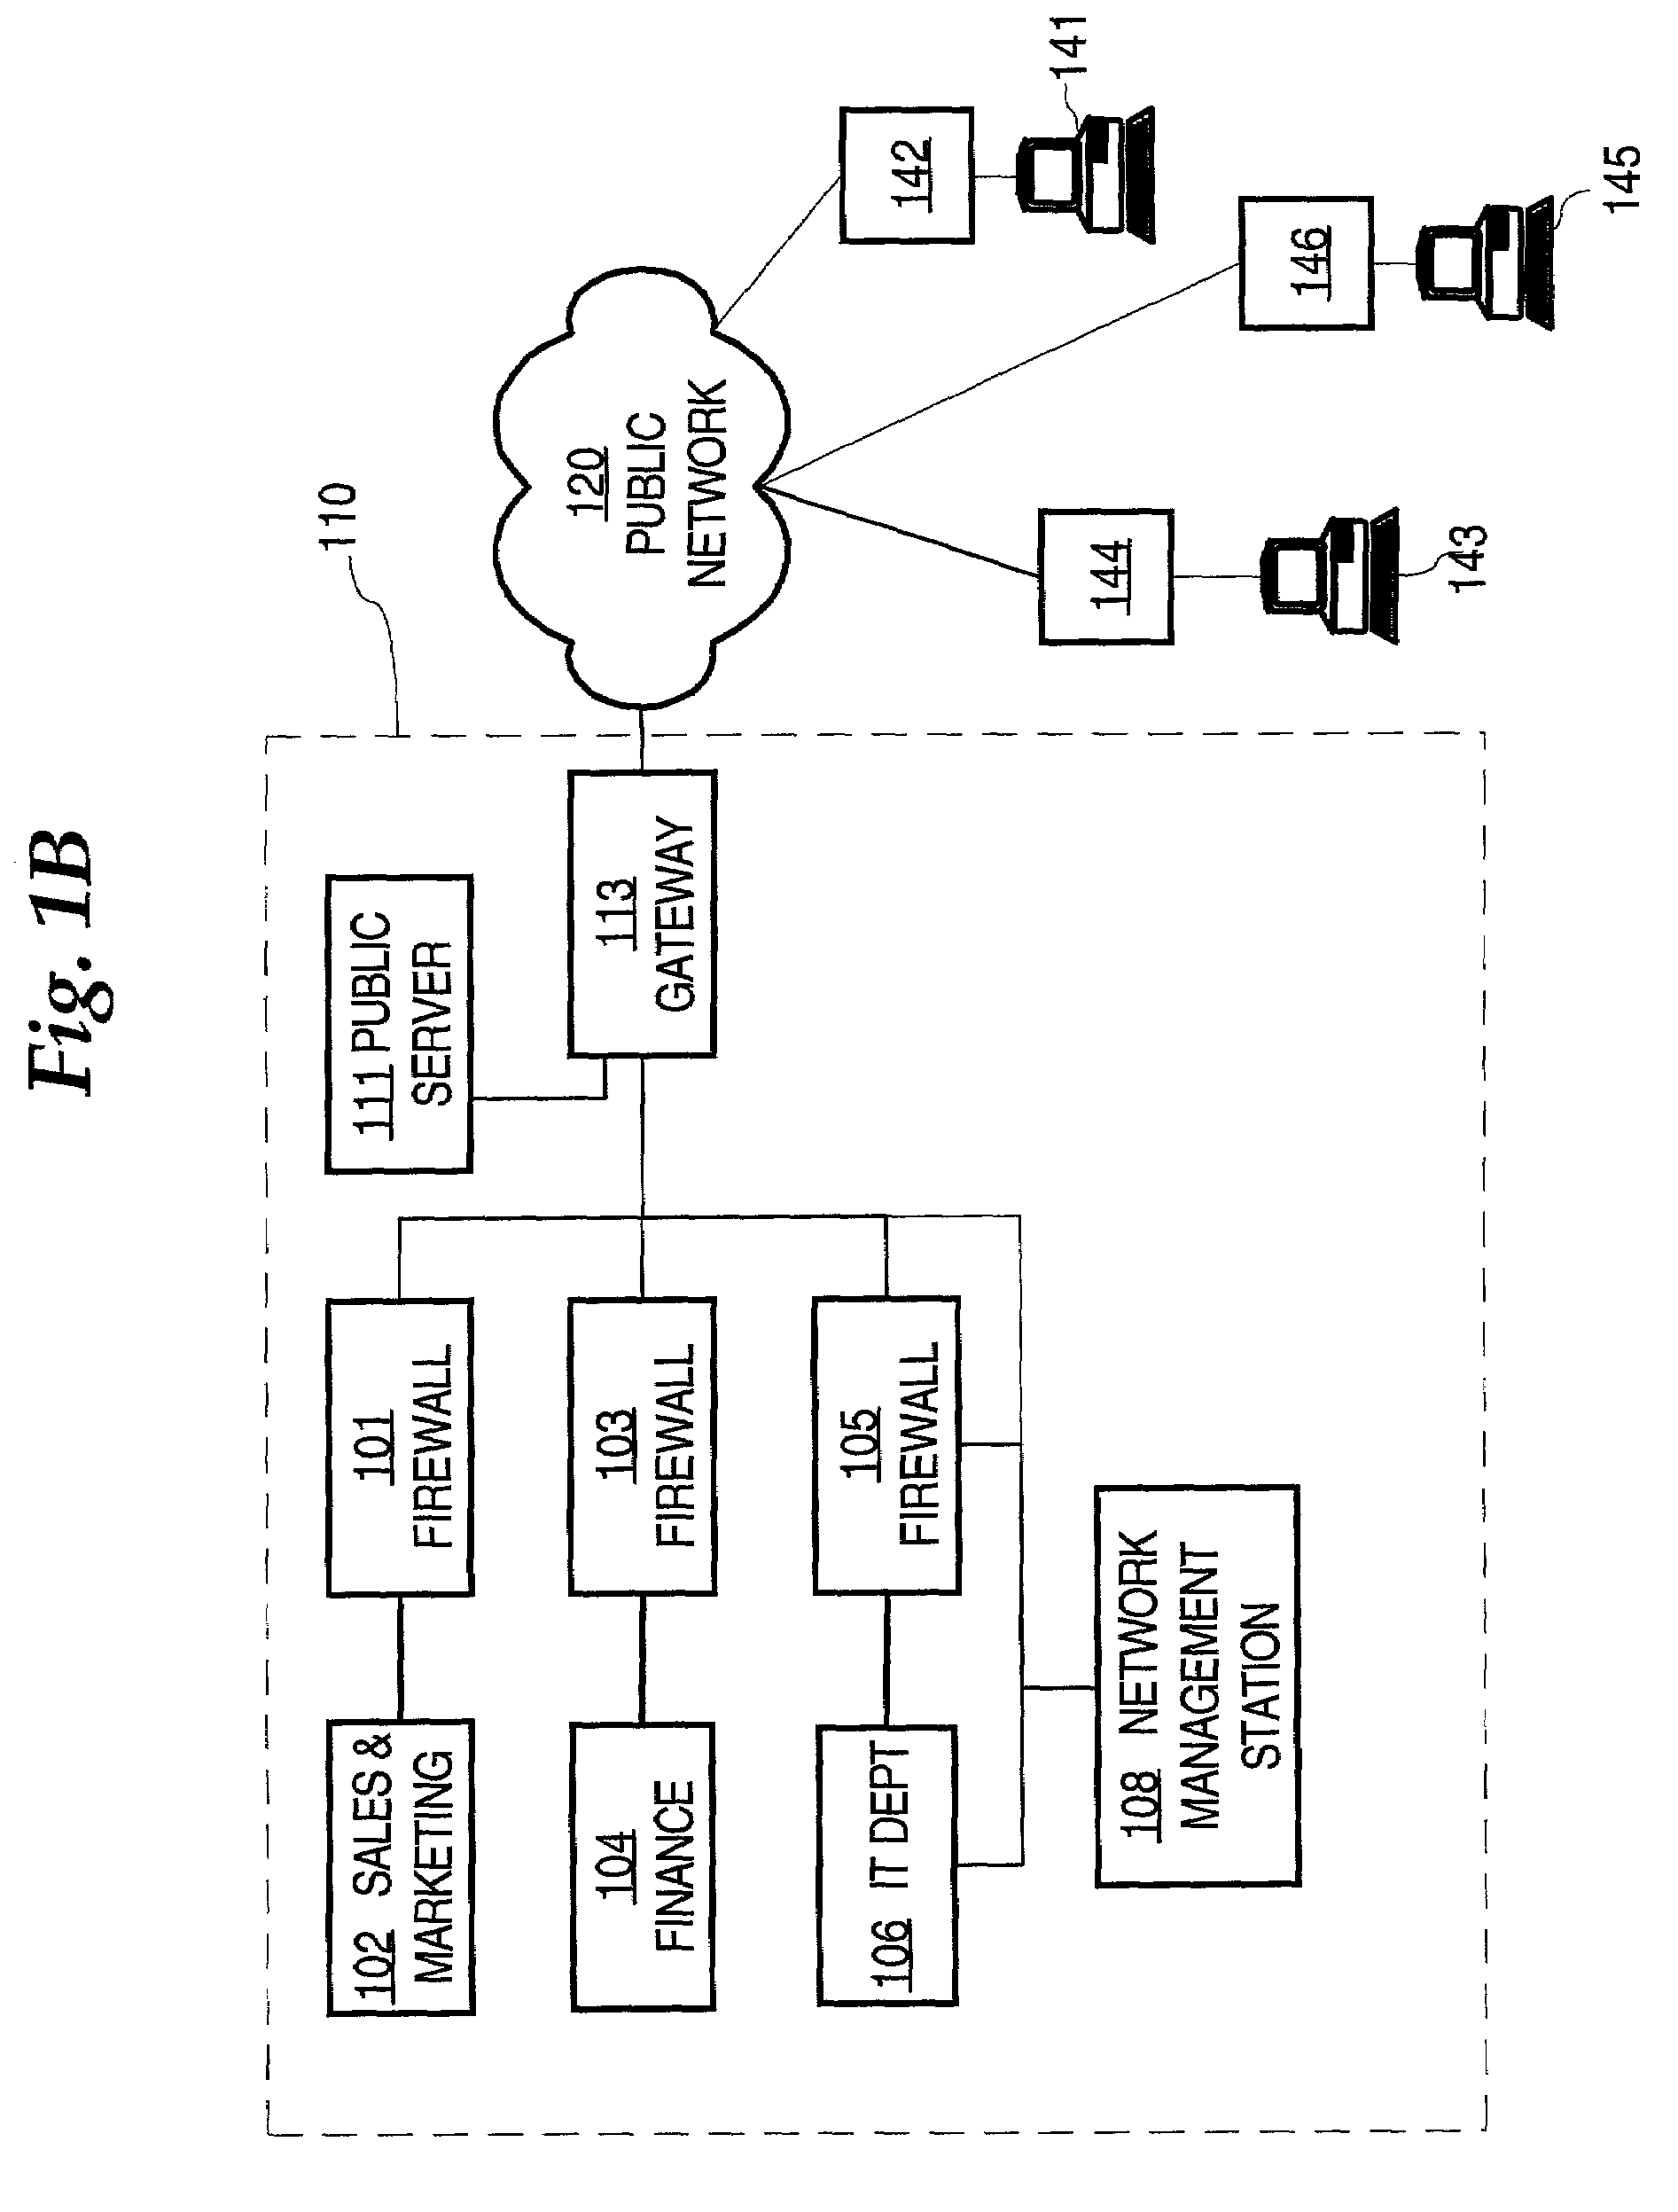 Method and apparatus providing controlled access of requests from virtual private network devices to managed information objects using simple network management protocol